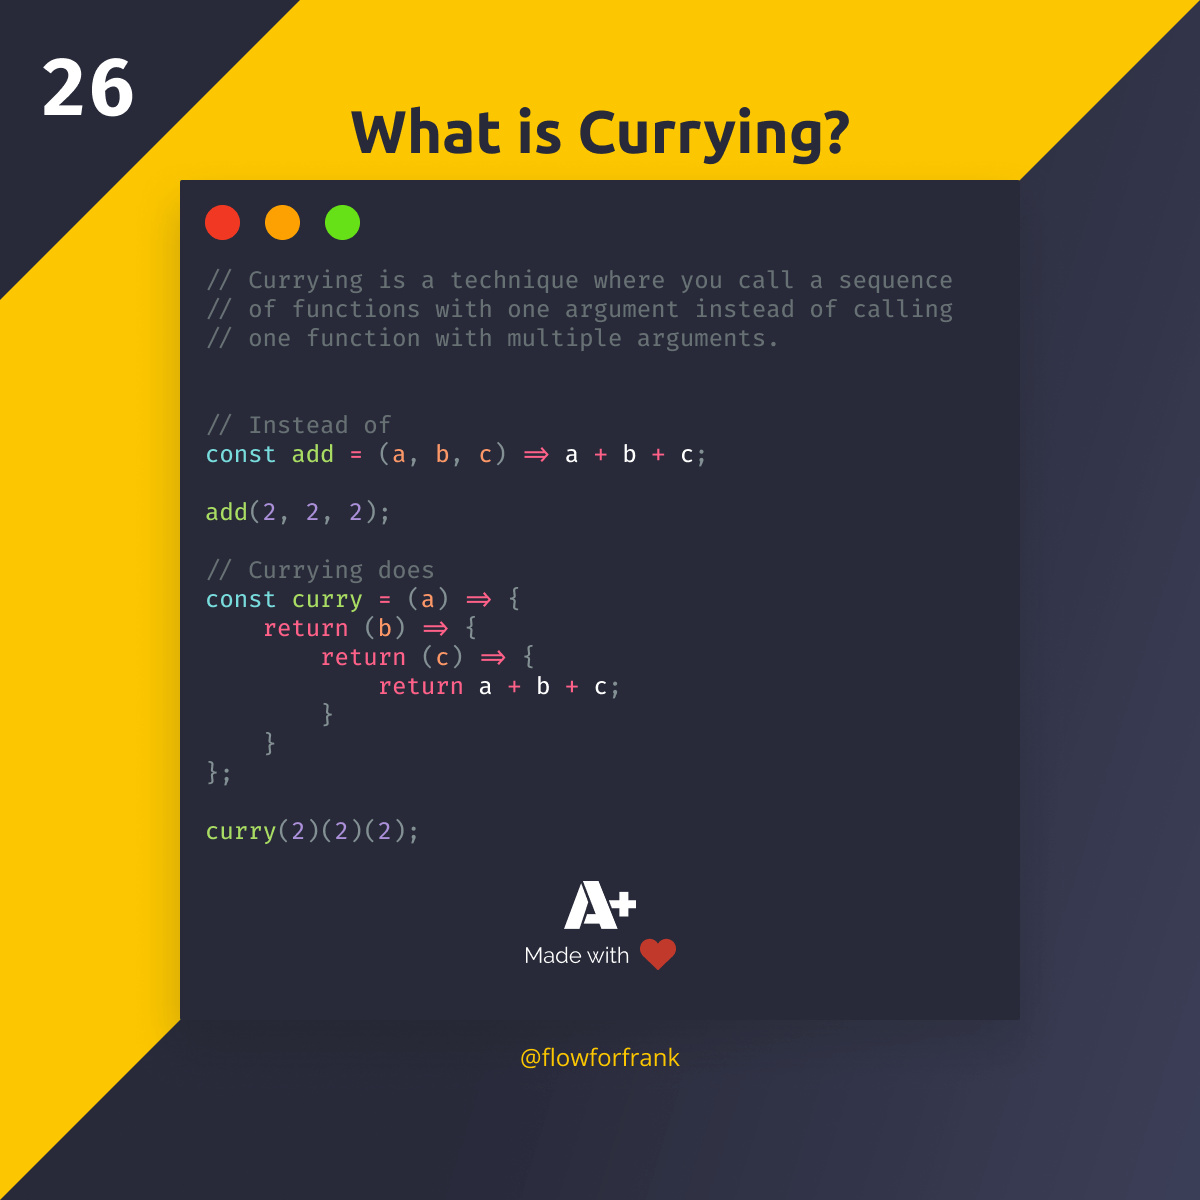 What is Currying in JavaScript?